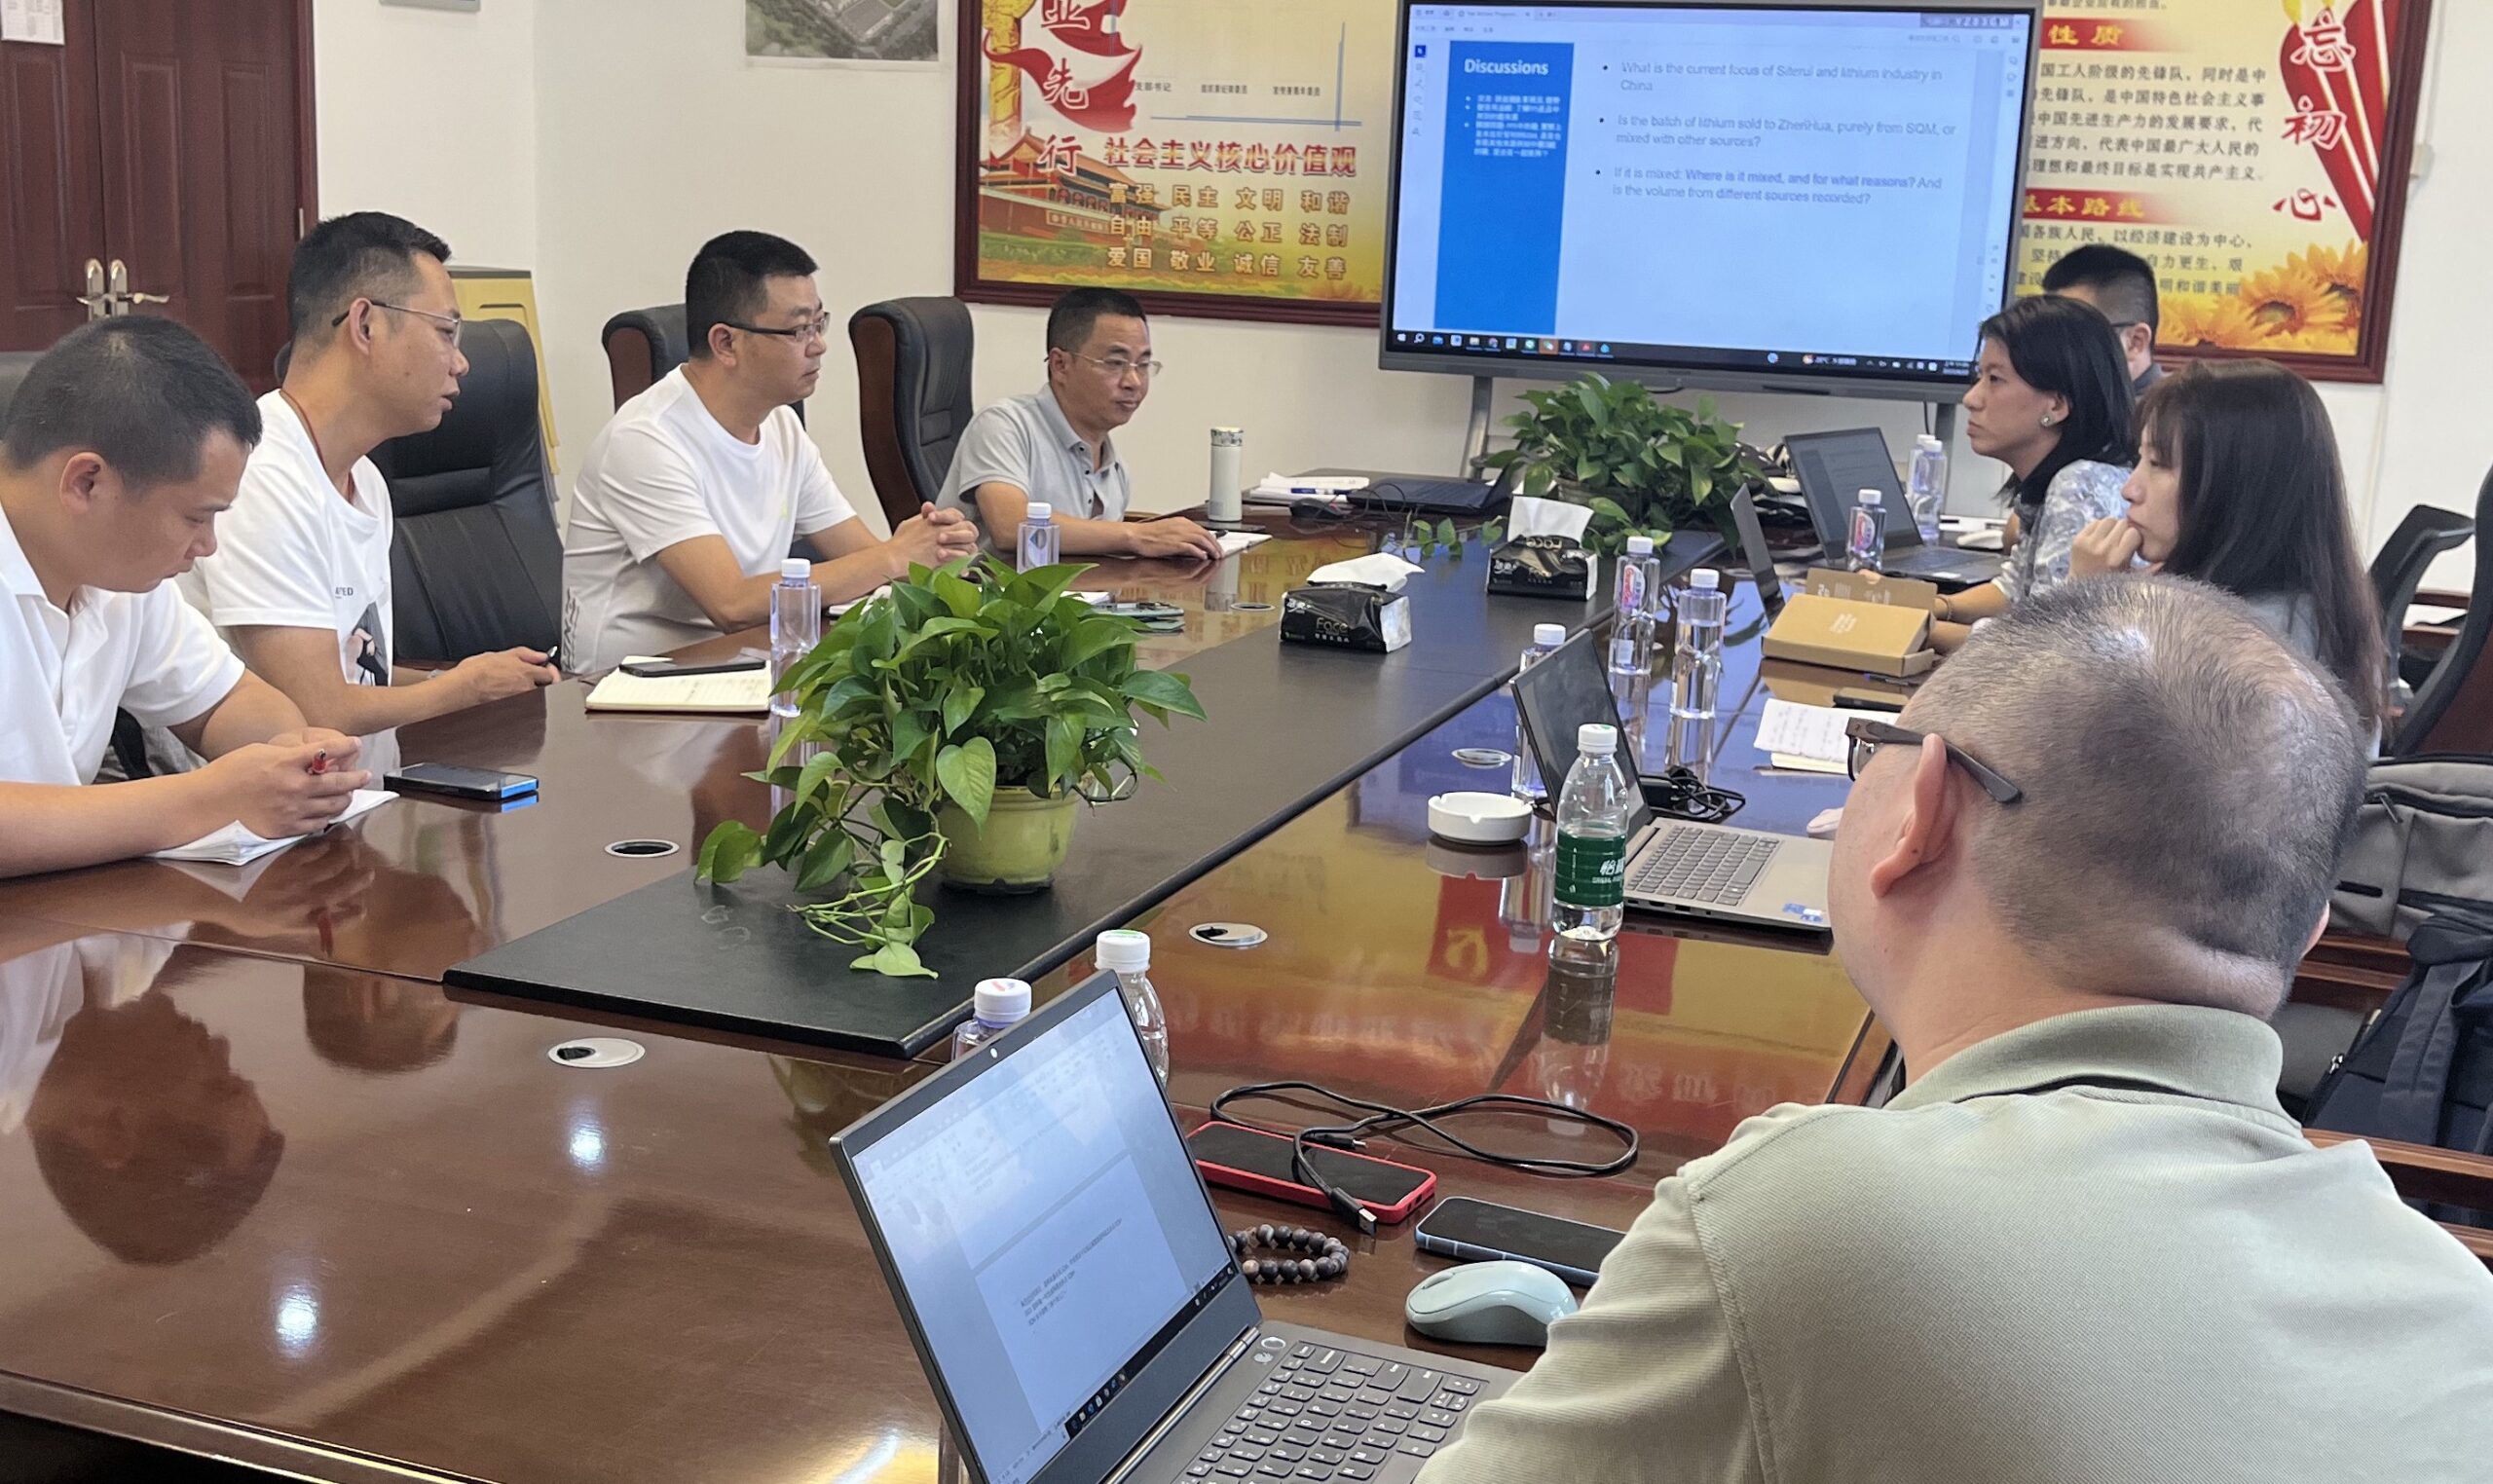 Meeting the refiner in Sichuan, discussing the current technology available and challenges with the lithium raw material market.